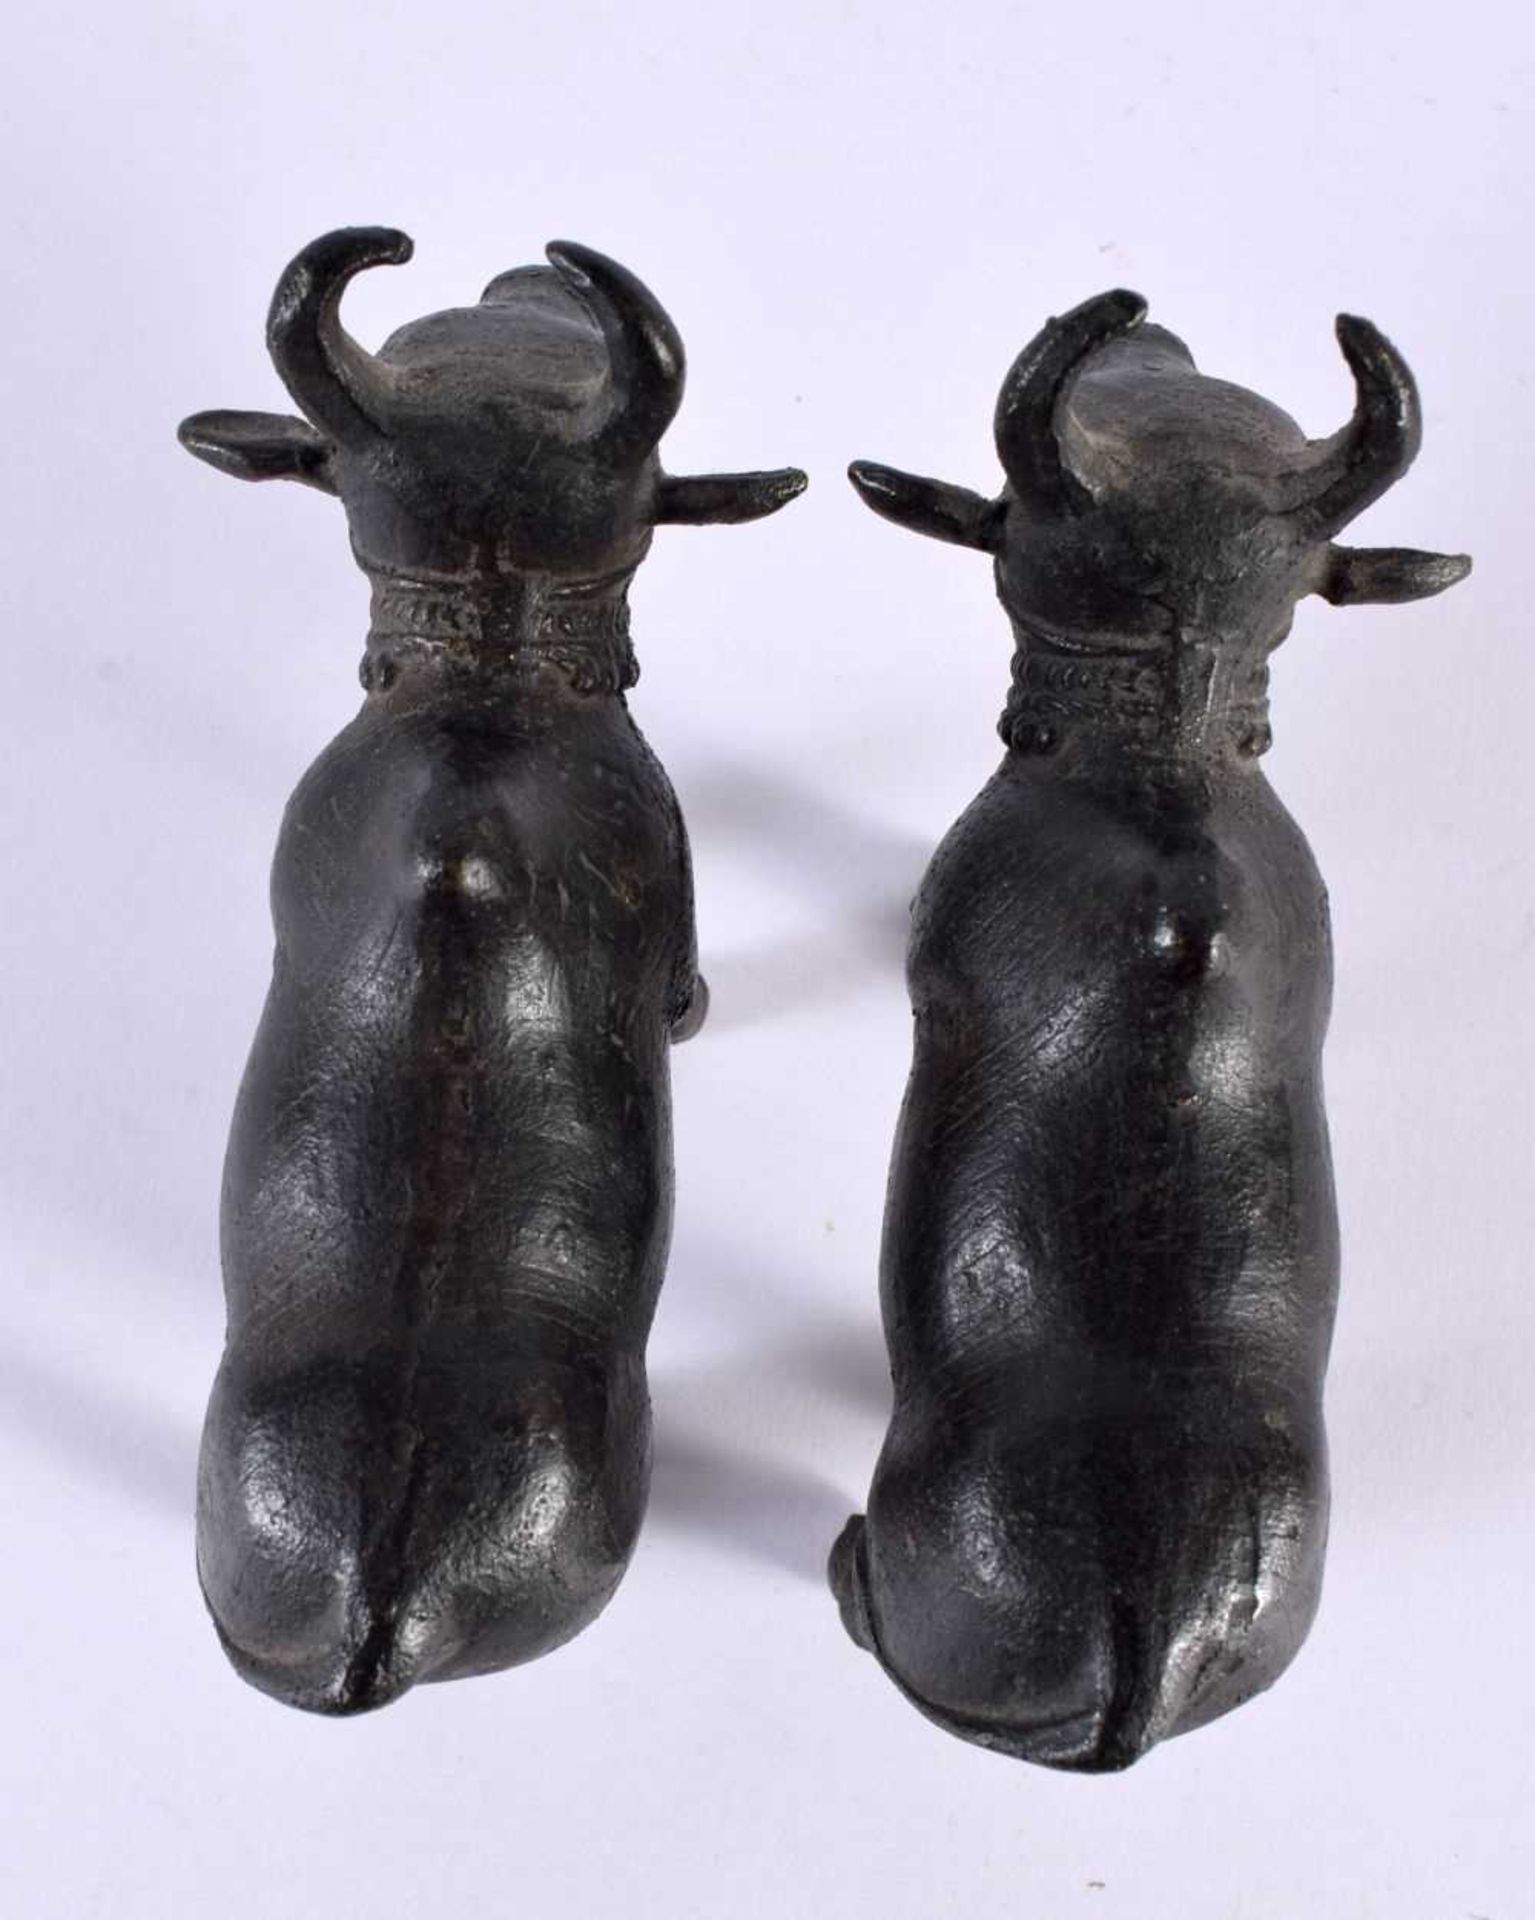 A PAIR OF 18TH/19TH CENTURY INDIAN BRONZE FIGURES OF NANDI BULLS modelled roaming. 11cm x 8 cm. - Image 4 of 5